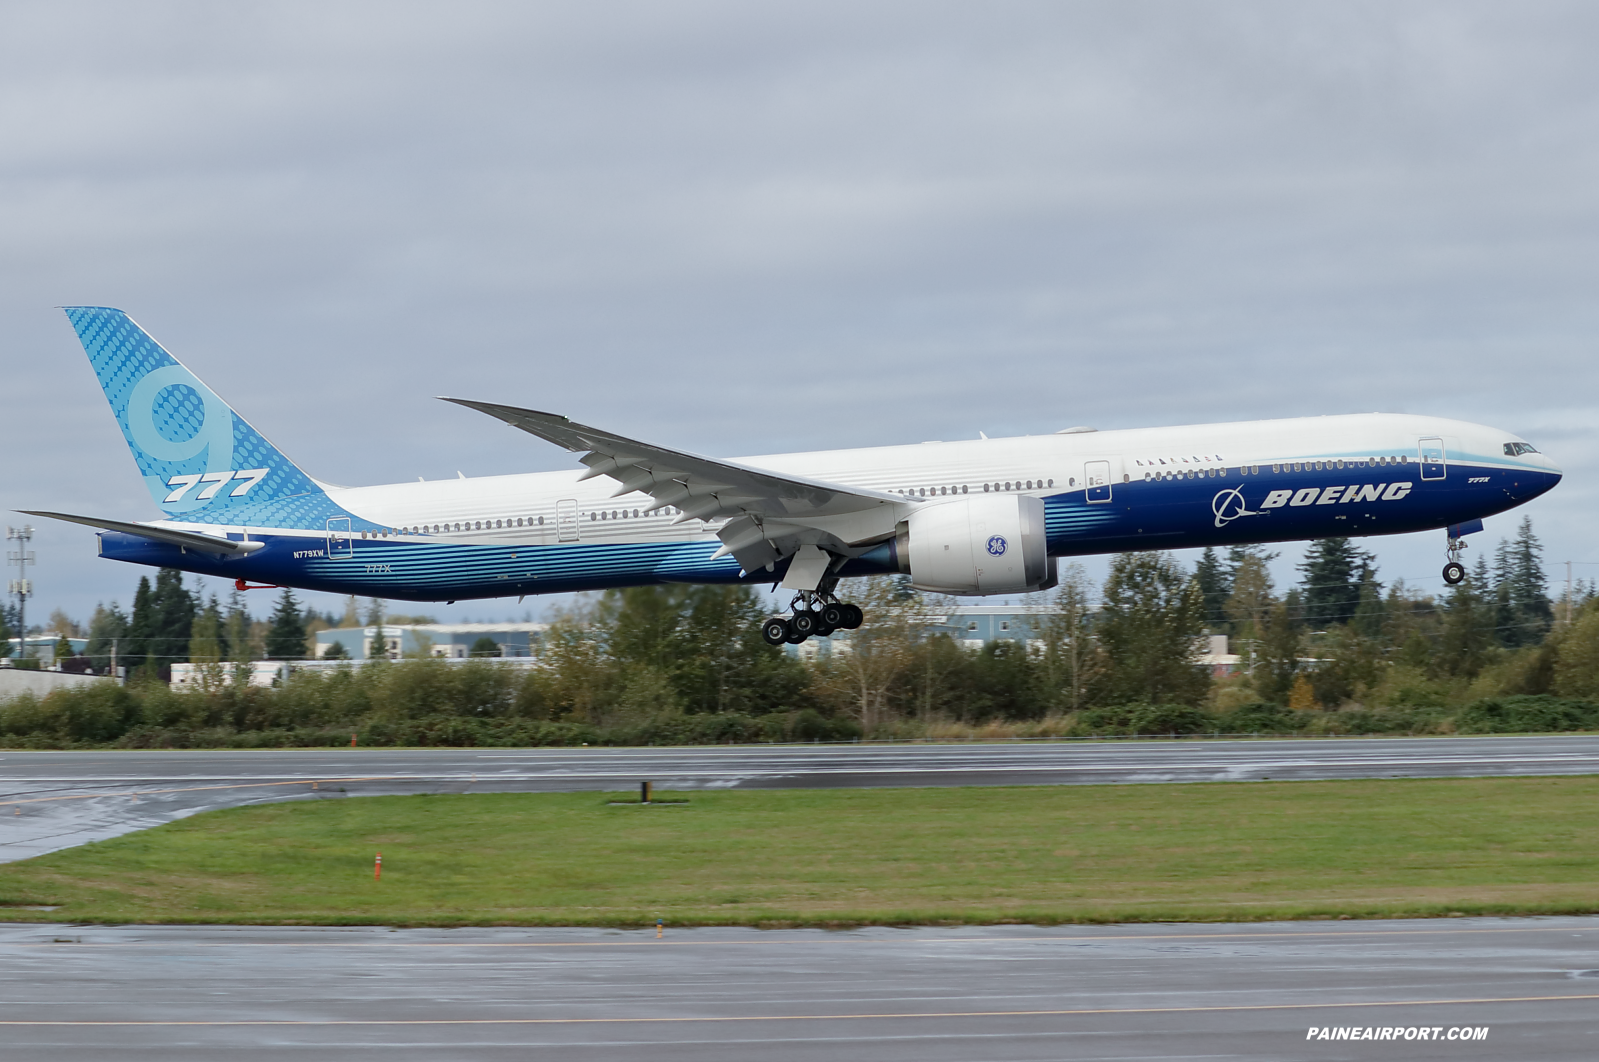 777-9 N779XW at KPAE Paine Field